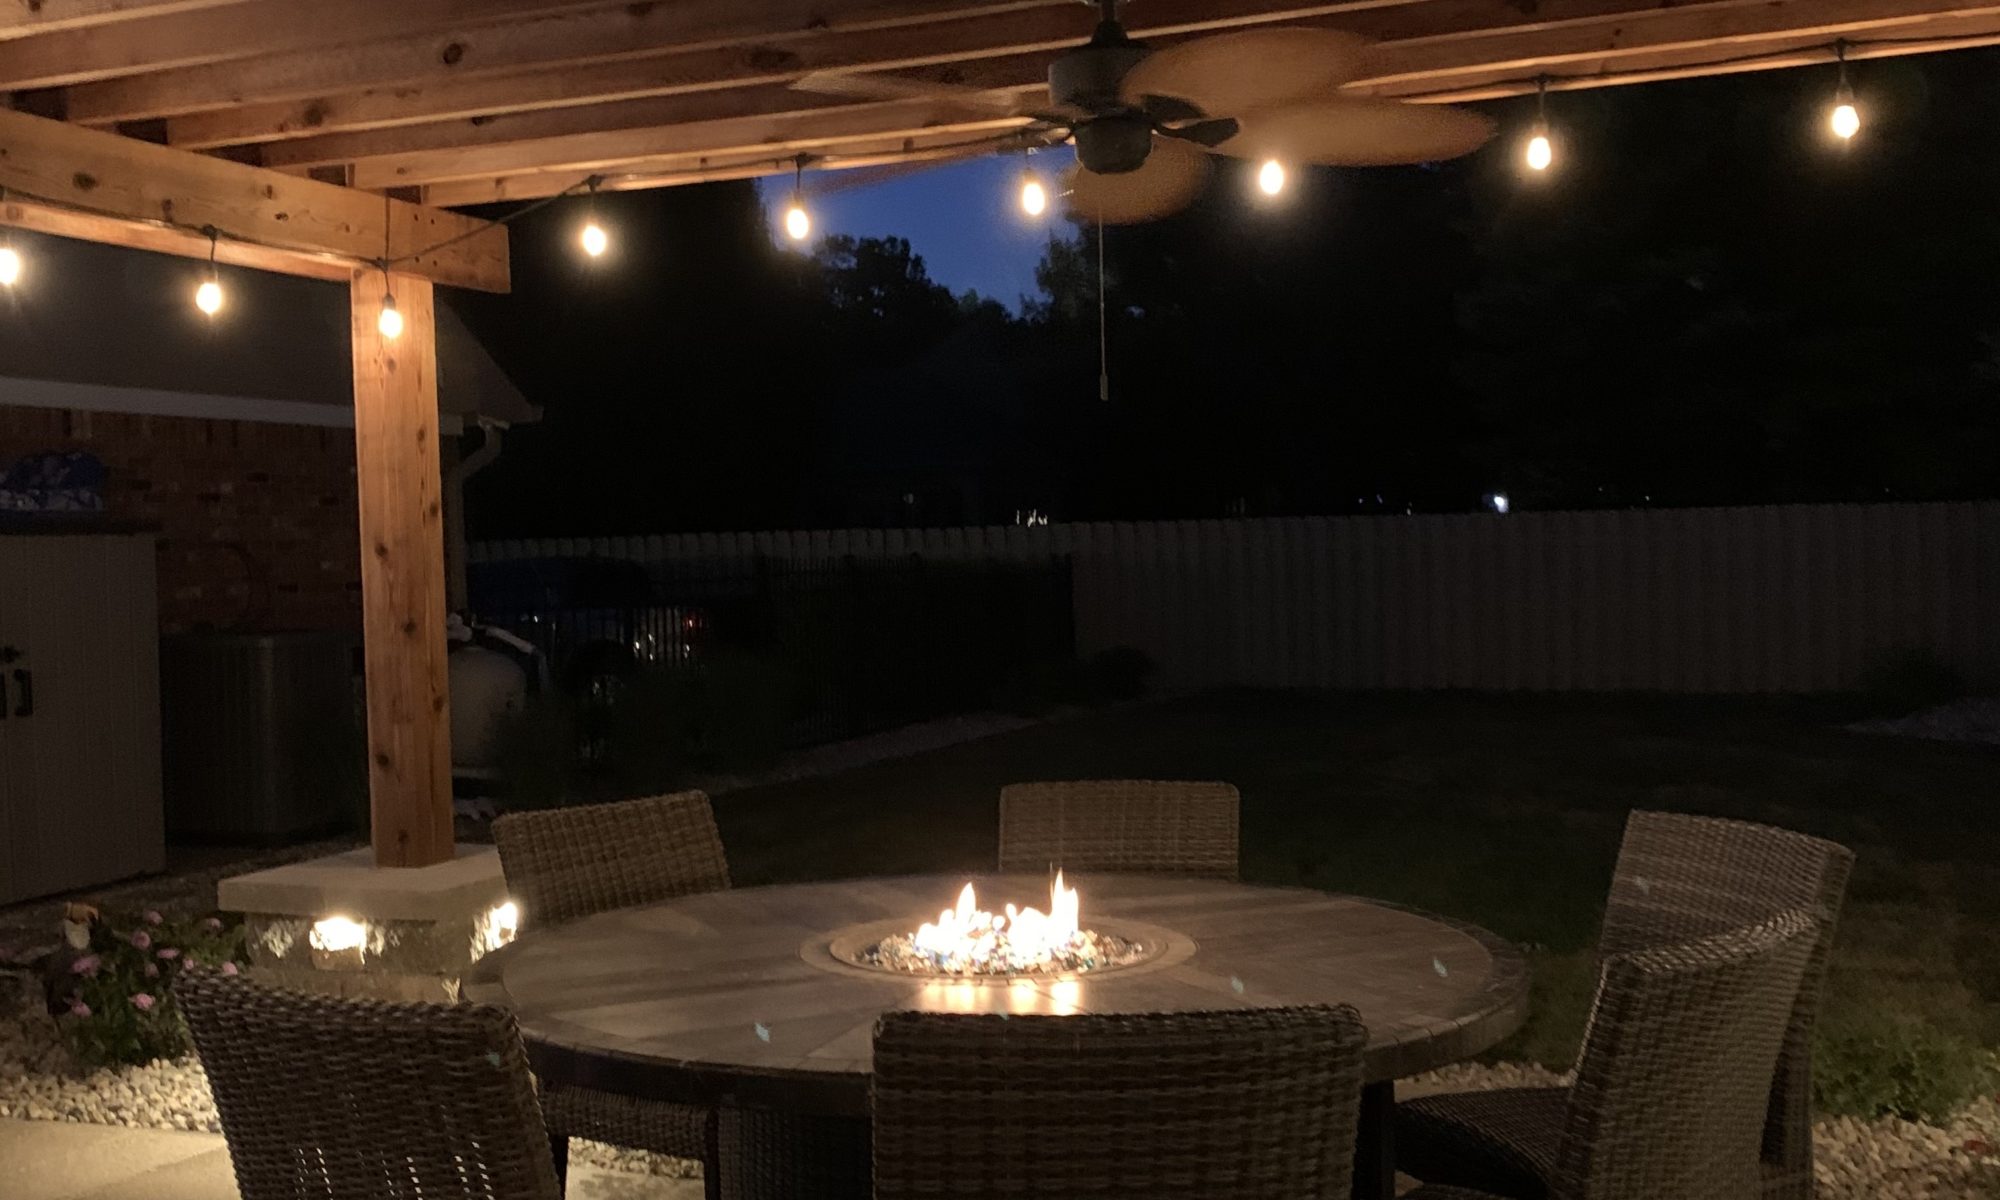 Precision Outdoors cannon cabana nights completed project night night time pool life fire table fire pit pool deck pergola outdoor kitchen timber structures retaining wall sun screens privacy screens outdoor dining entertaining space Greenwood Indiana